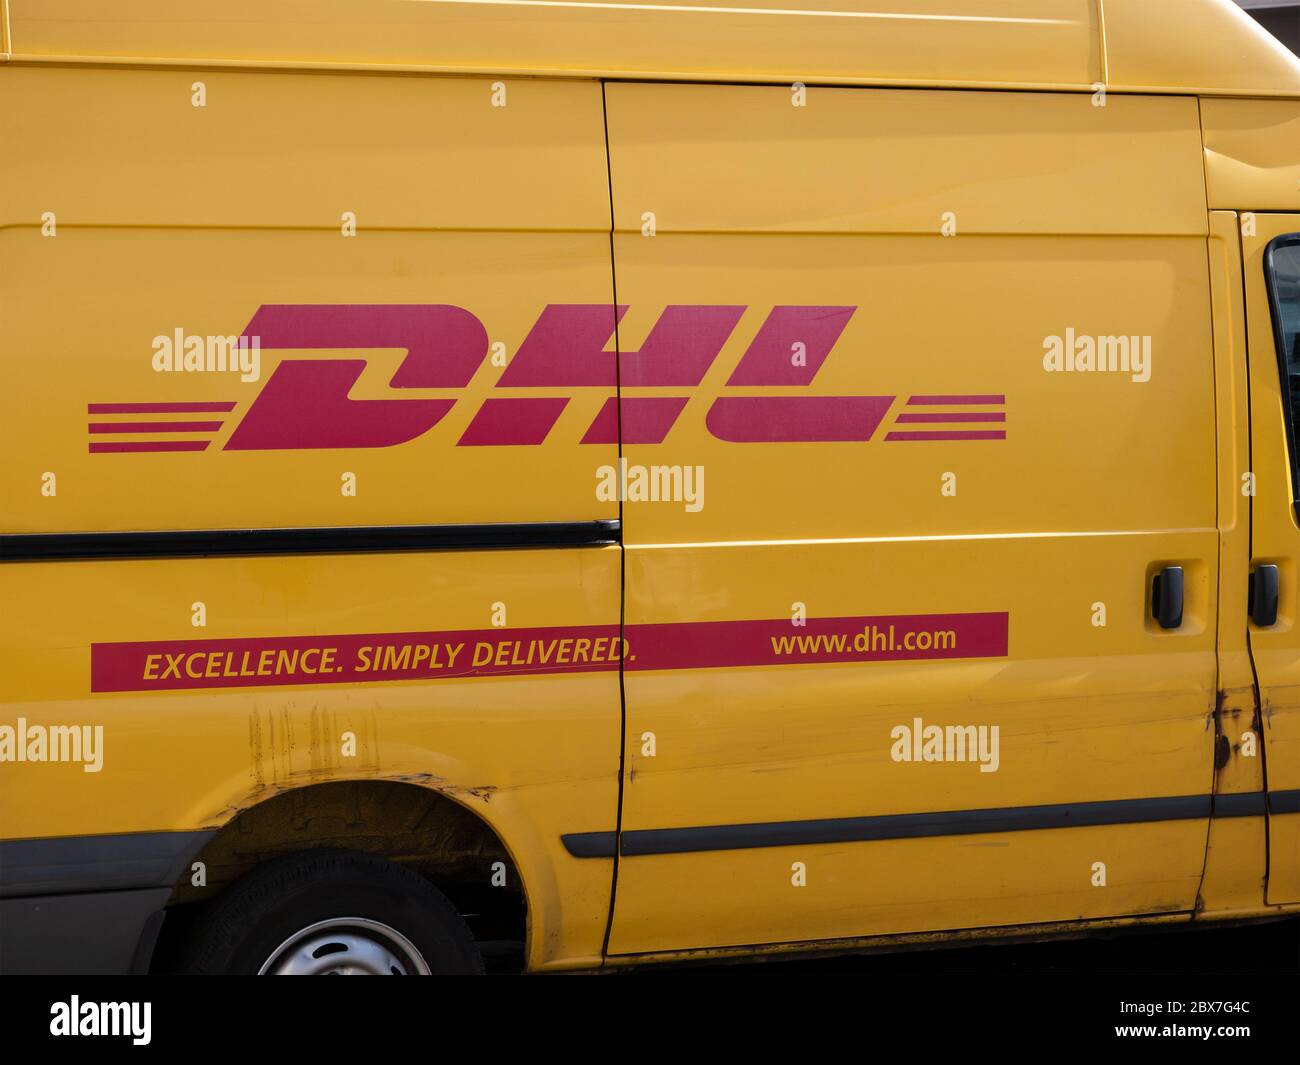 BERLIN, ALLEMAGNE - 4 JUIN 2020: Small Truck of Package Delivery Company DHL avec slogan anglais à Berlin, Allemagne Banque D'Images